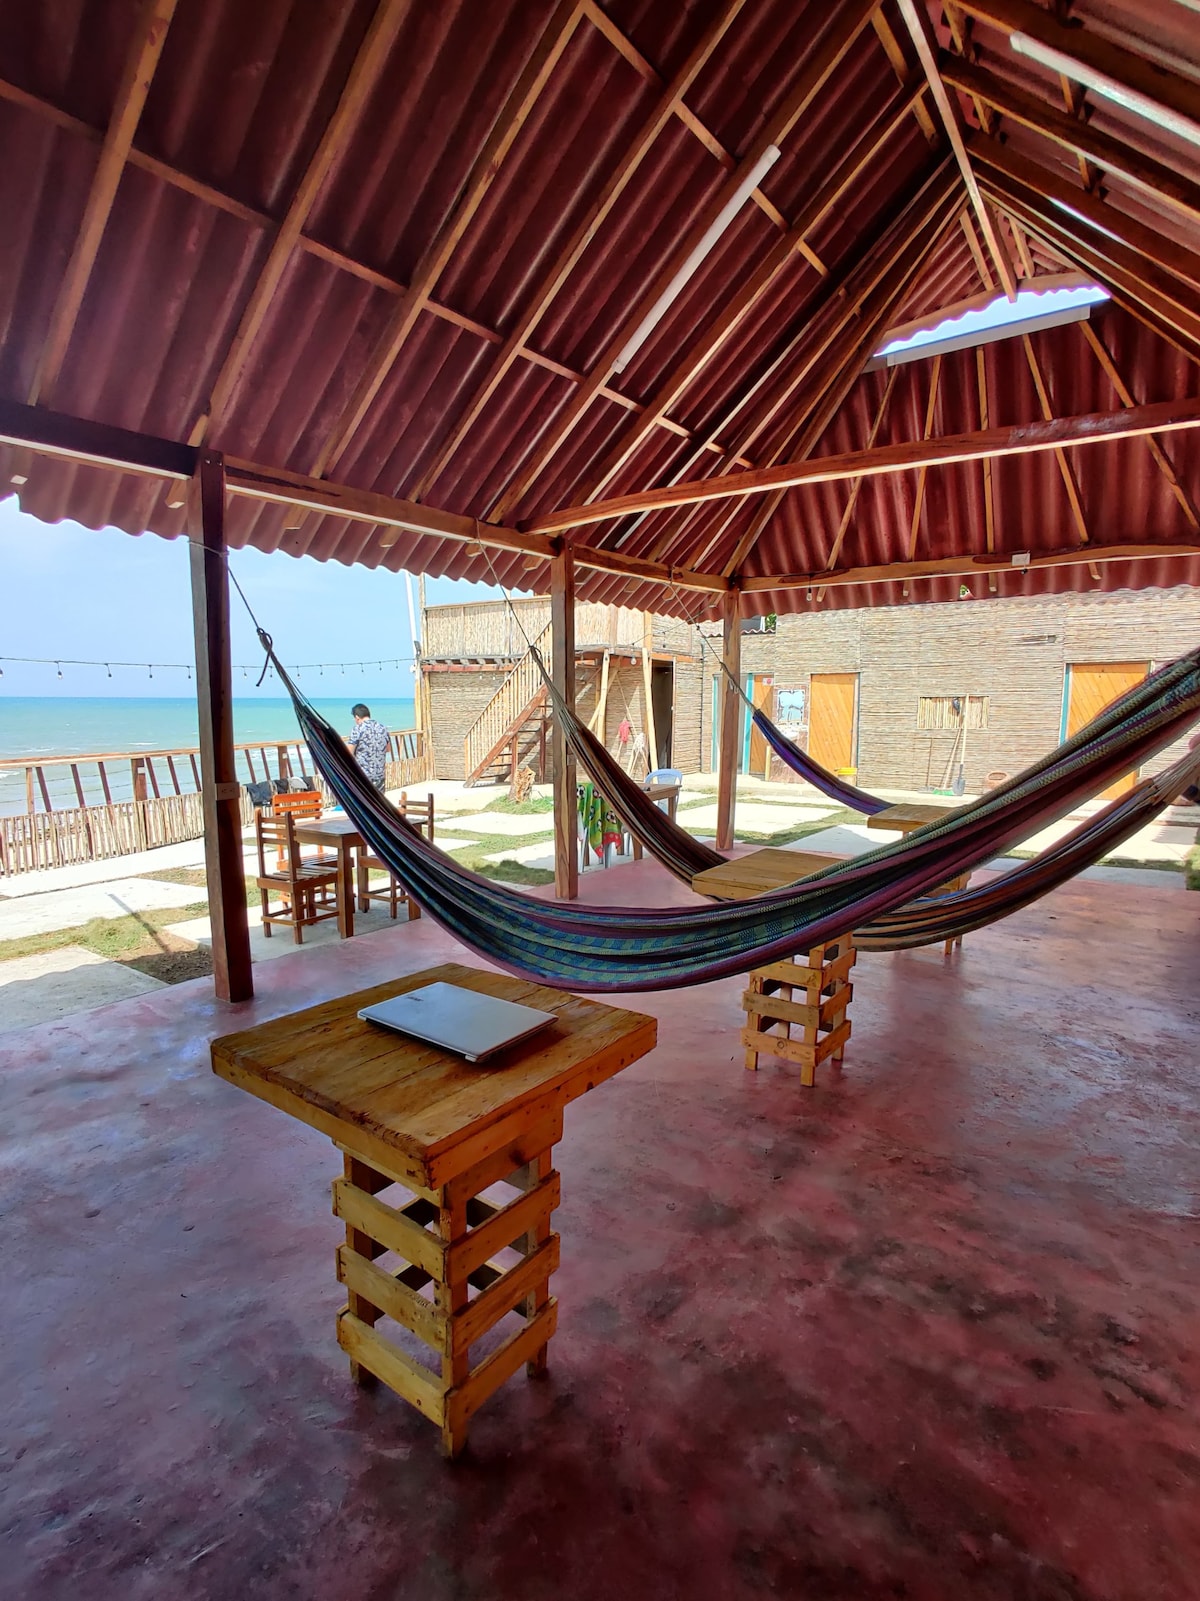 Ocean View Cabins and Hammocks by the Sea